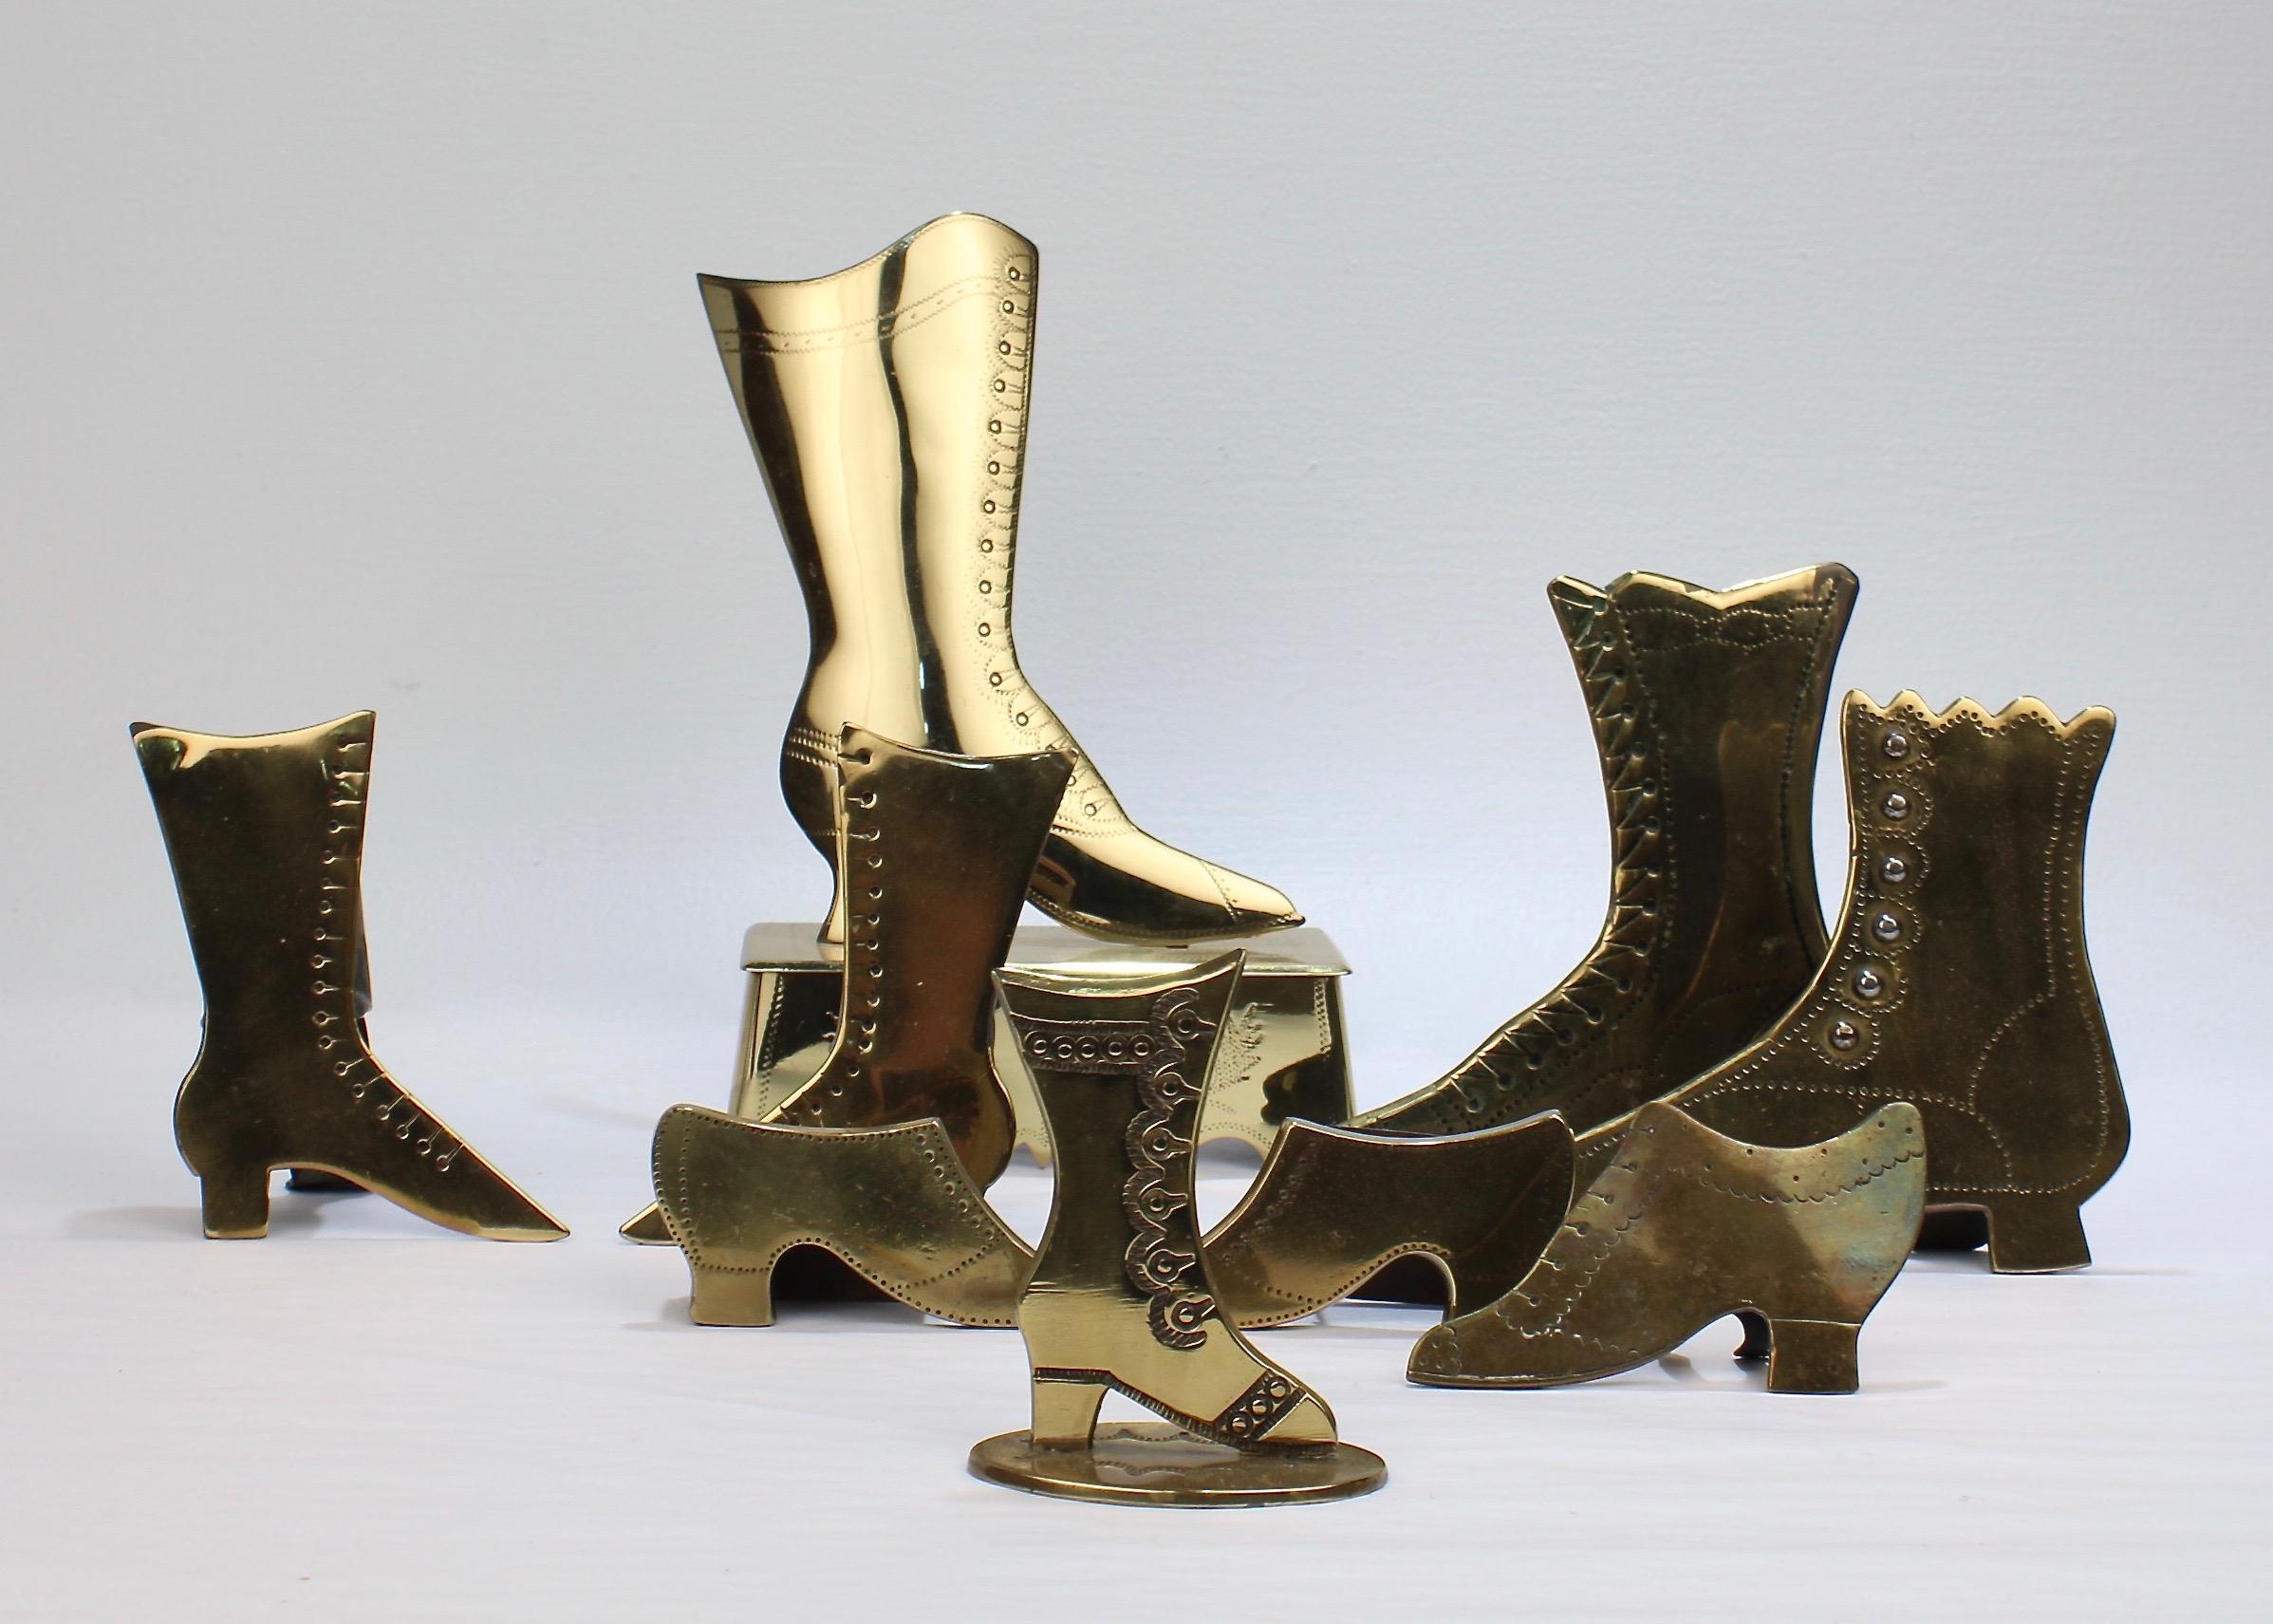 A collection of 9 brass shoe mantel ornaments.

Each in the form of a lady's boot or shoe. 

Some with applied buttons and etched decorations. 

Most have easel back stands. A few appear to possibly be matchsafes and one could double as a doorstop.